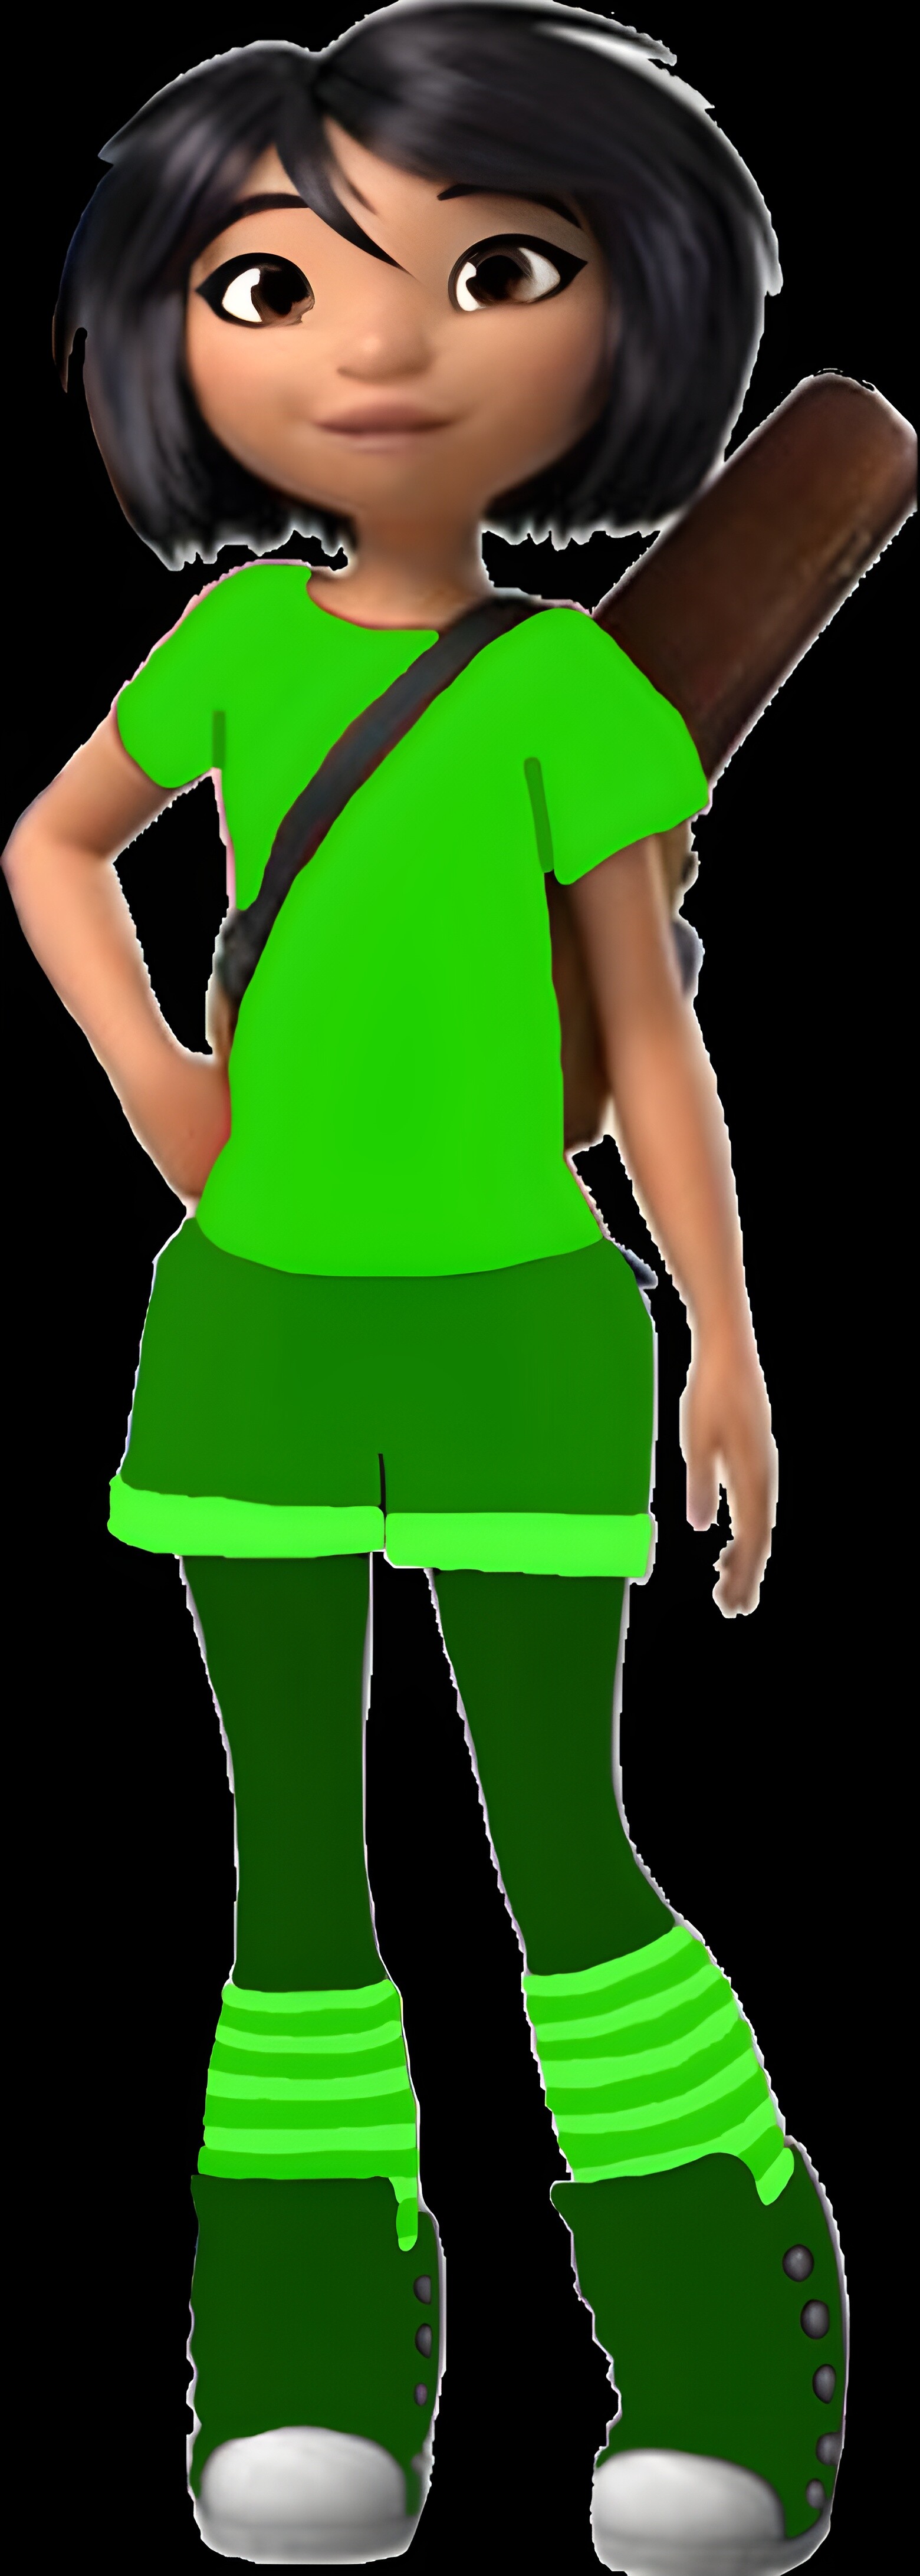 ArtStation - Sonic X Amy Rose (PNG) Sonic Boom Knuckles (PNG) Tokio (PNG)  Calen (PNG) Nico Vega (PNG) My 2020 St. Patrick's Day Gacha Look in PNG  Yi's St Patrick's Day Look (